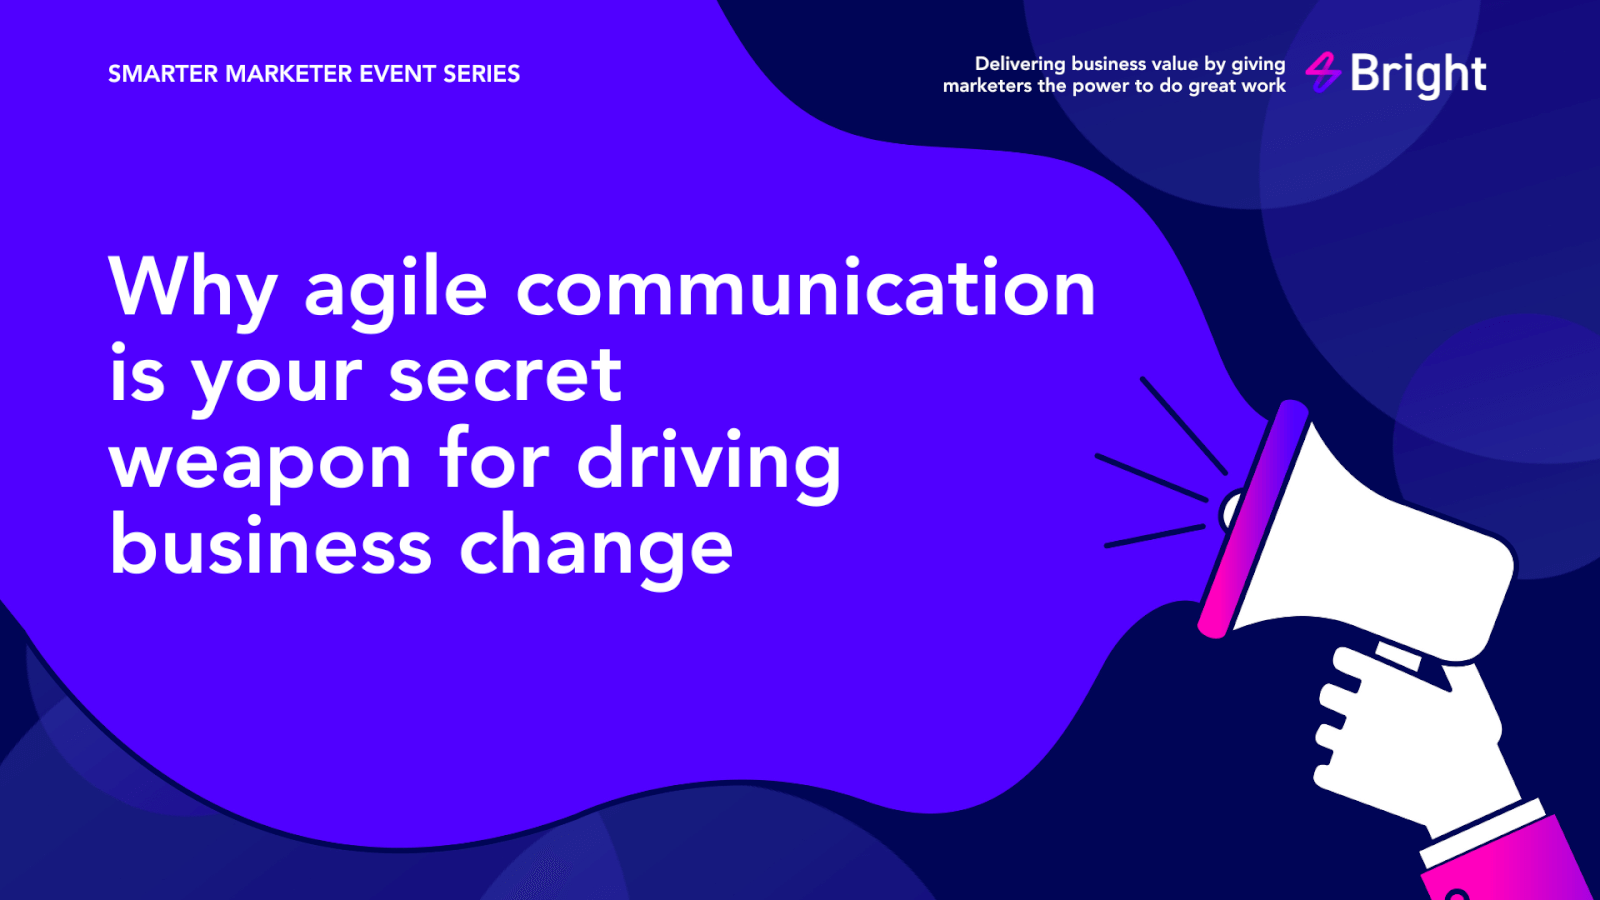 Why agile communication is your secret weapon for driving business change